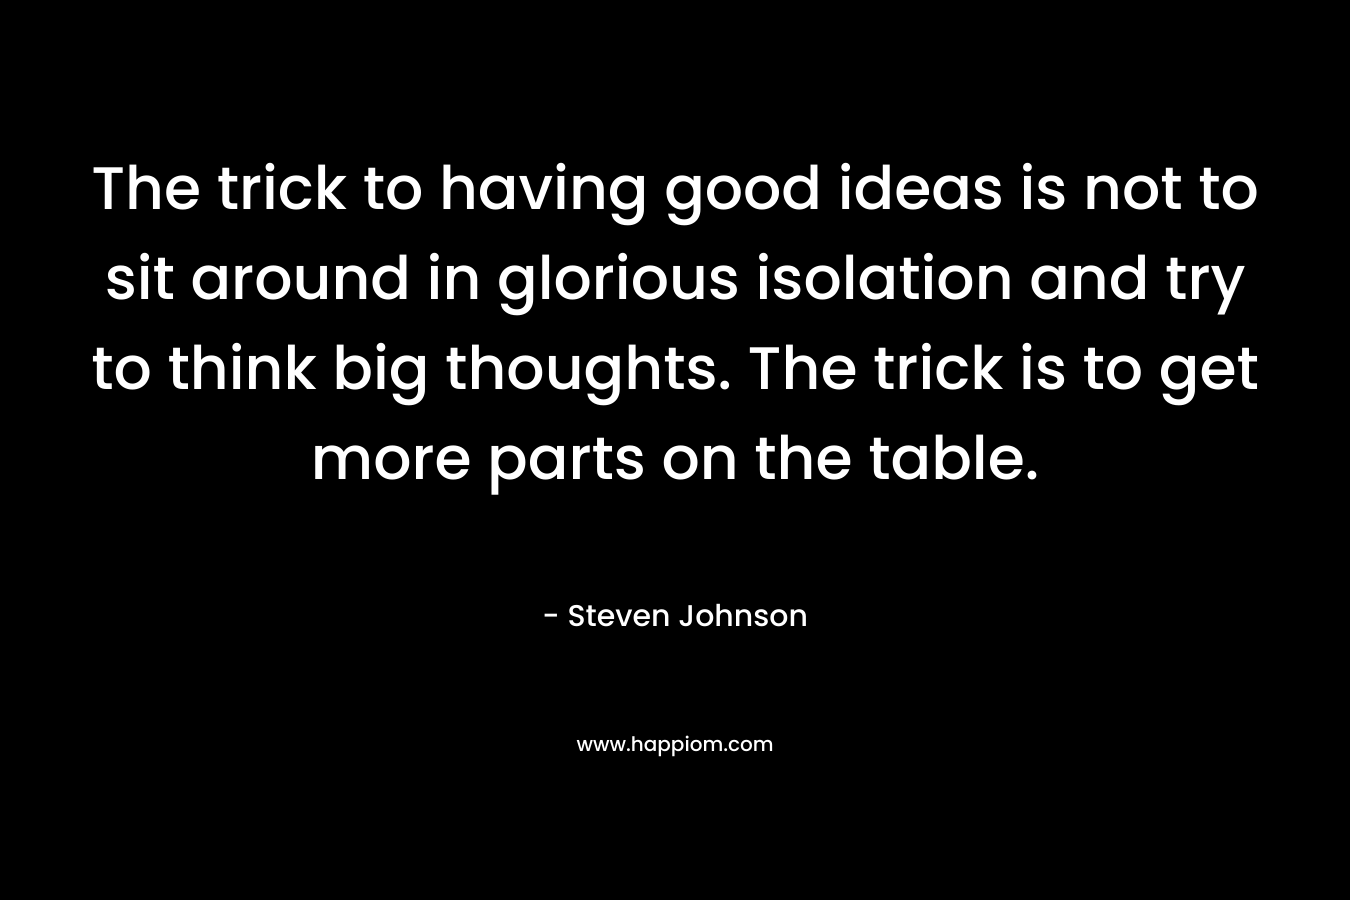 The trick to having good ideas is not to sit around in glorious isolation and try to think big thoughts. The trick is to get more parts on the table. – Steven Johnson